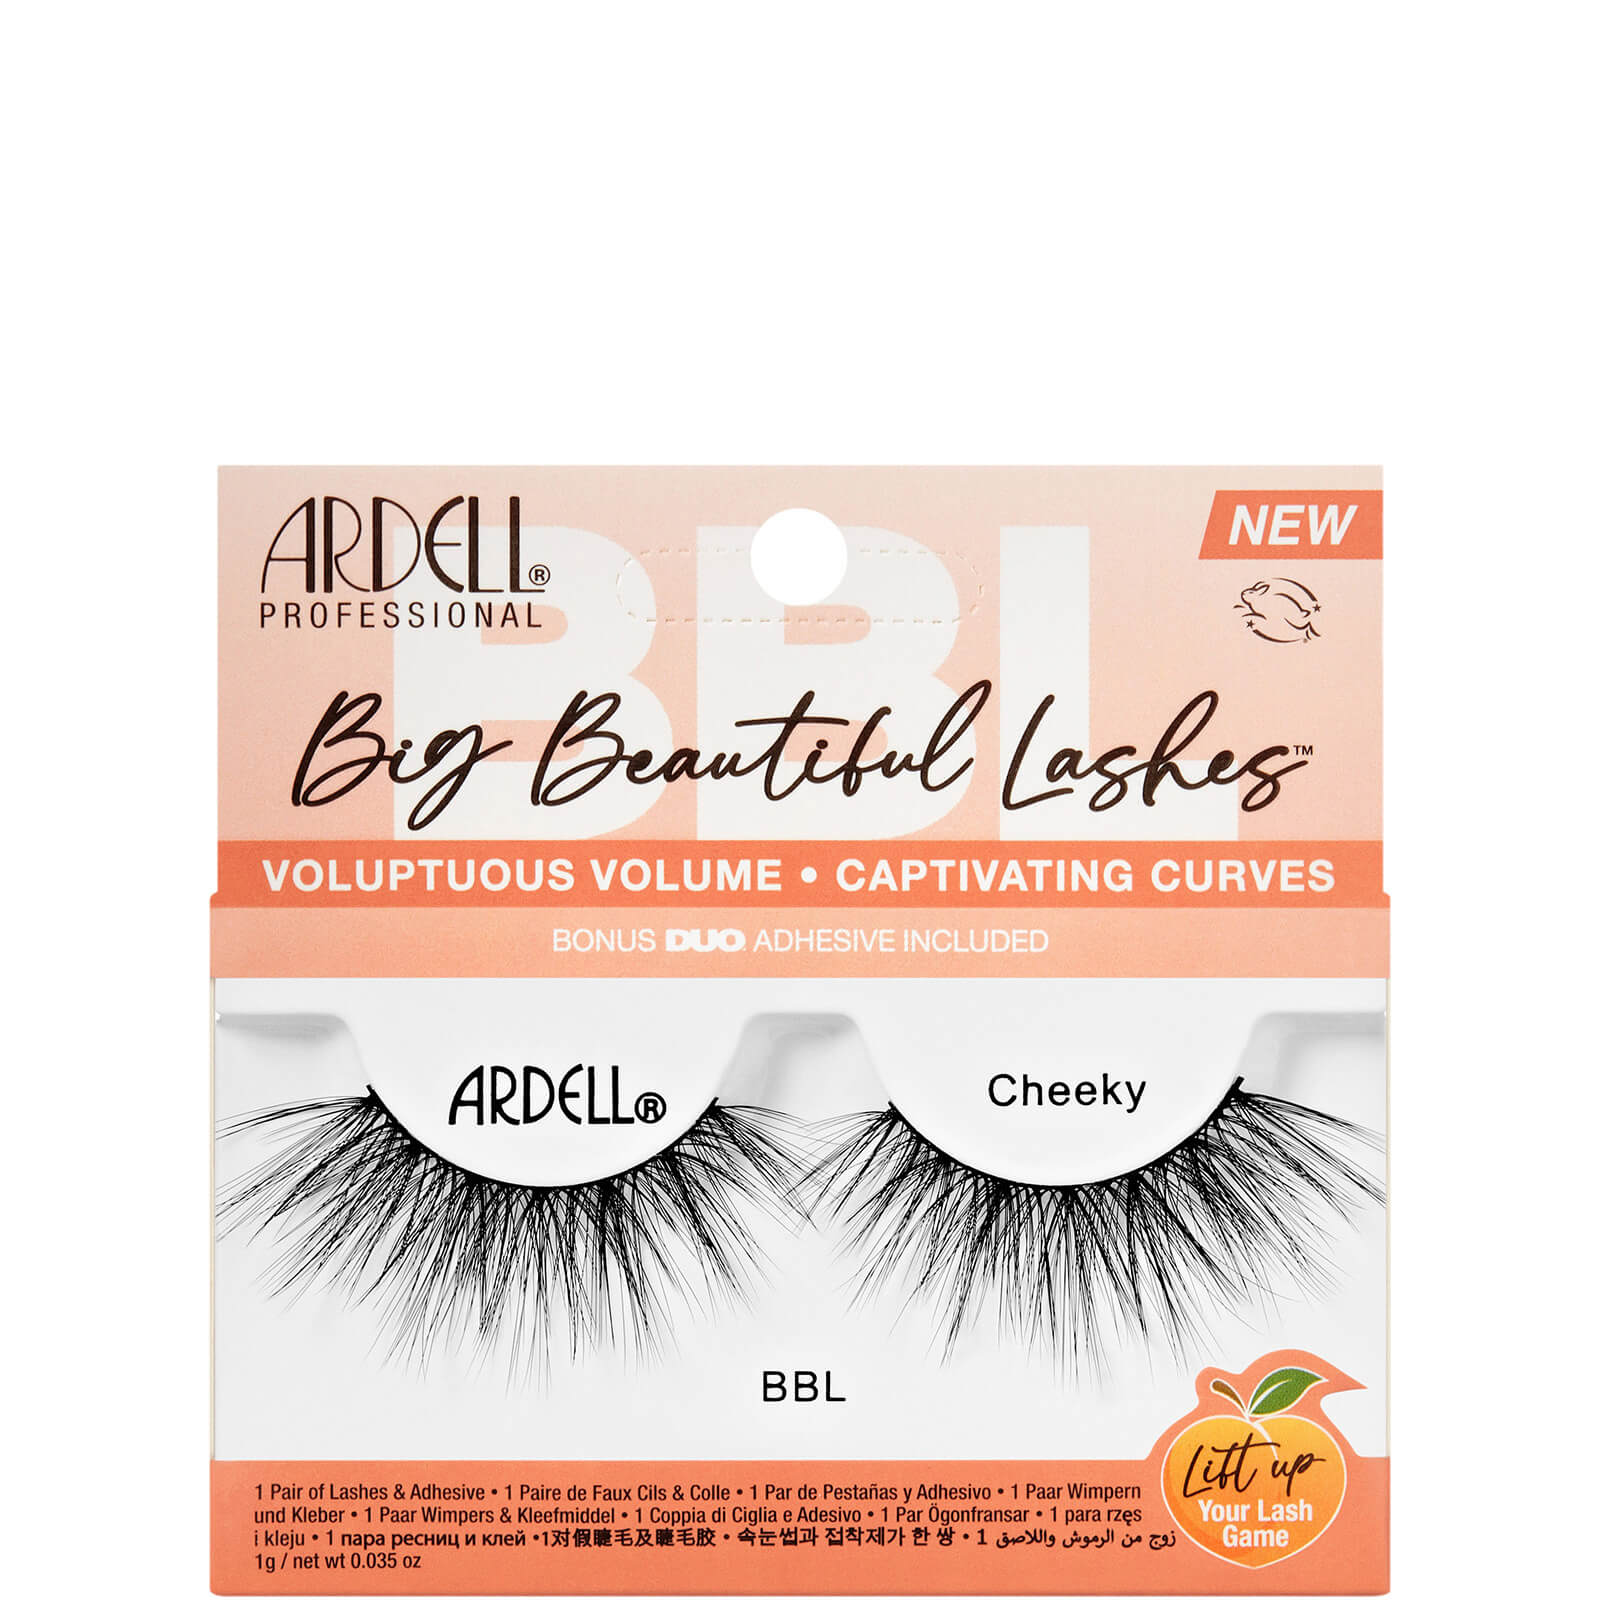 Ardell BBL Cheeky Lashes